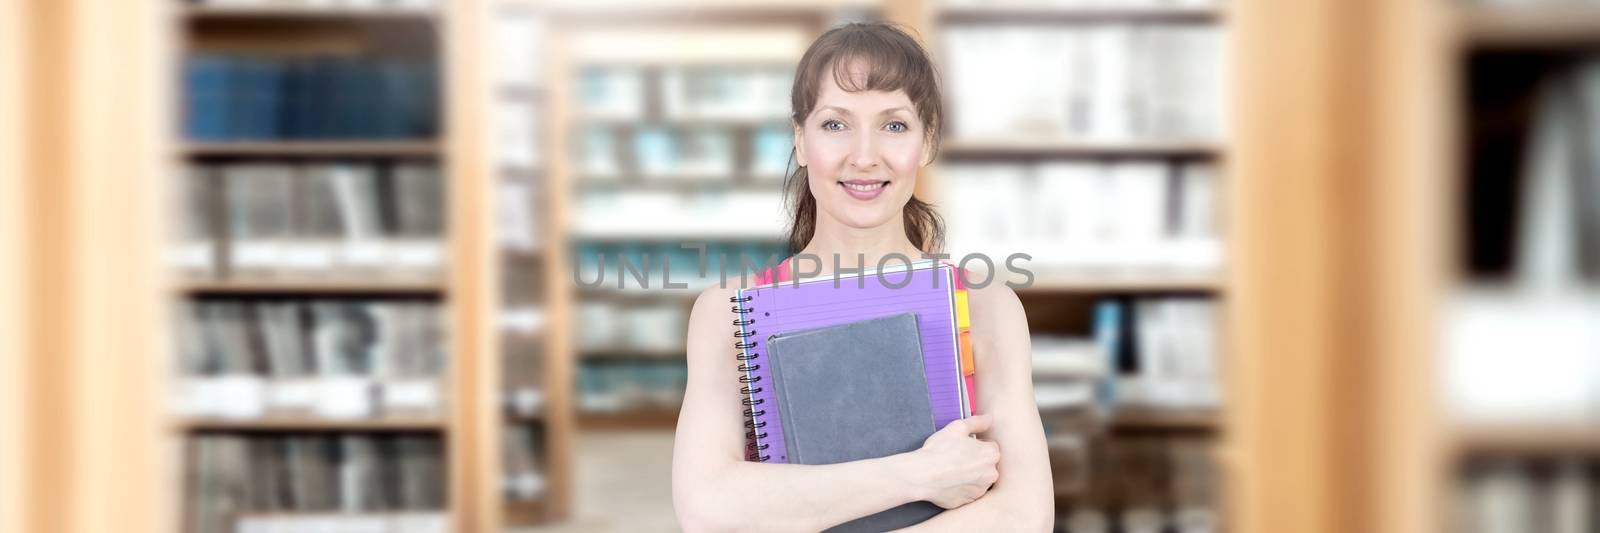 Student mature woman in education library by Wavebreakmedia